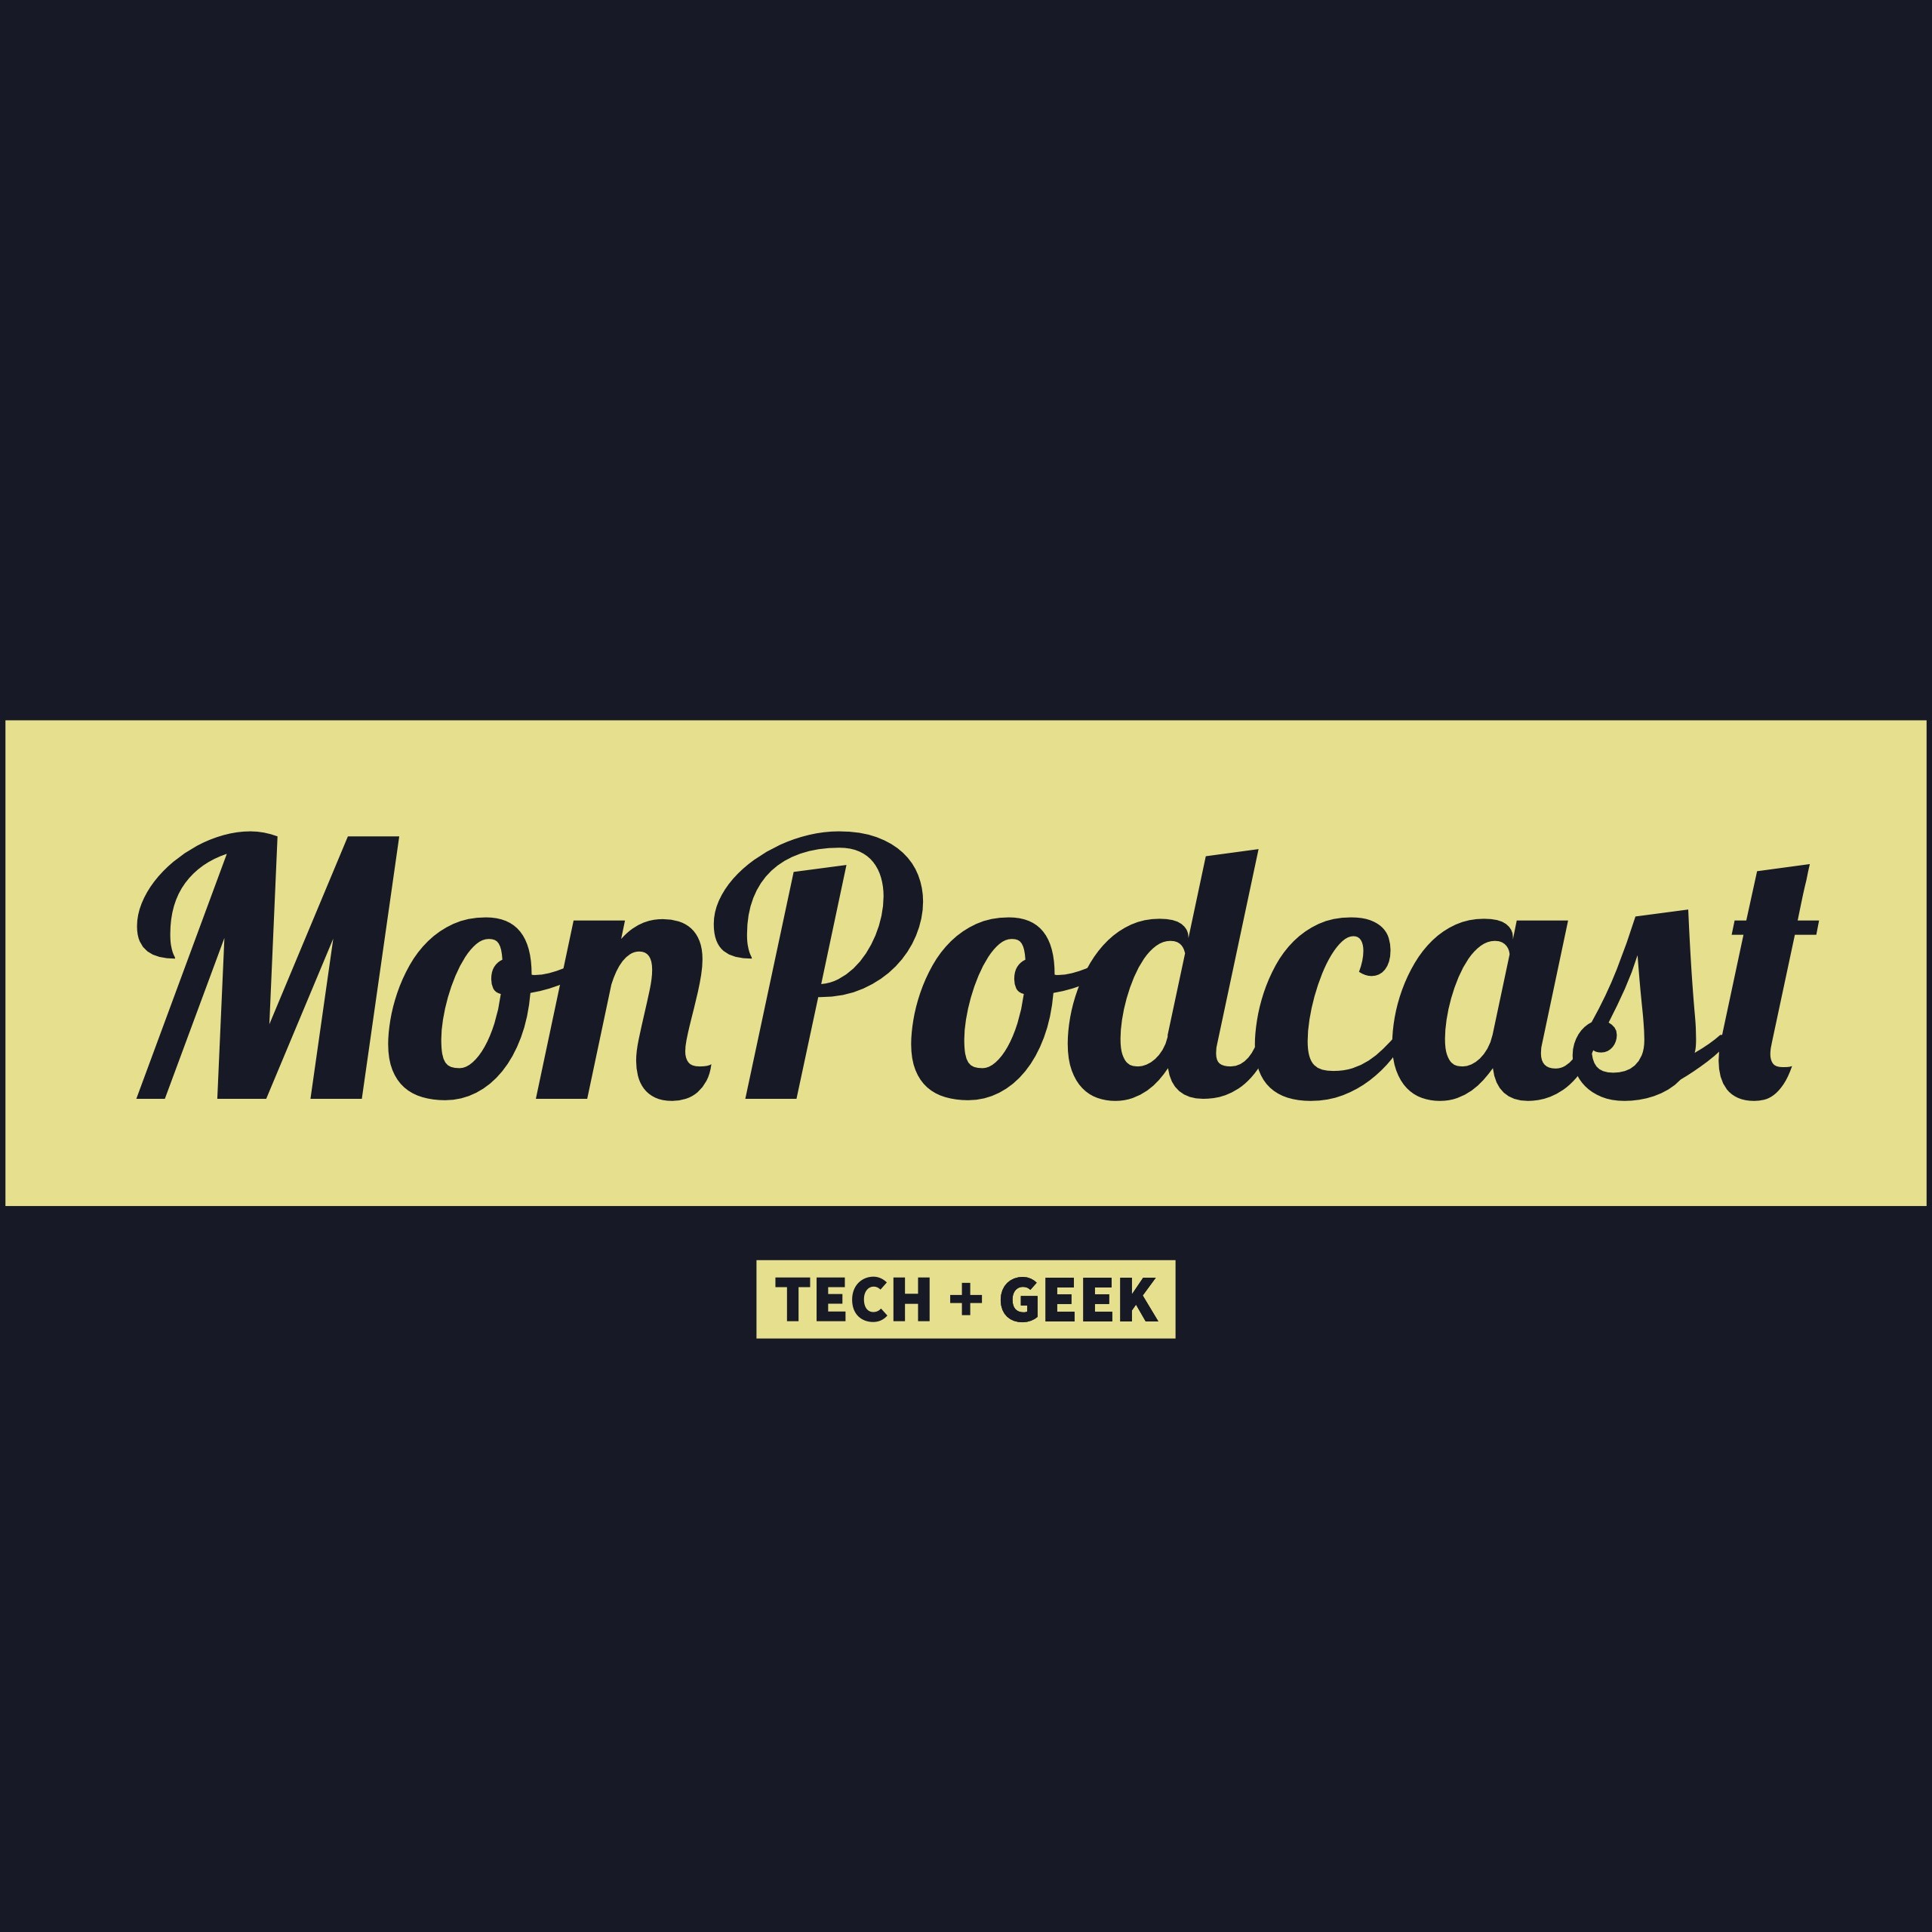 MonPodcast (Old)